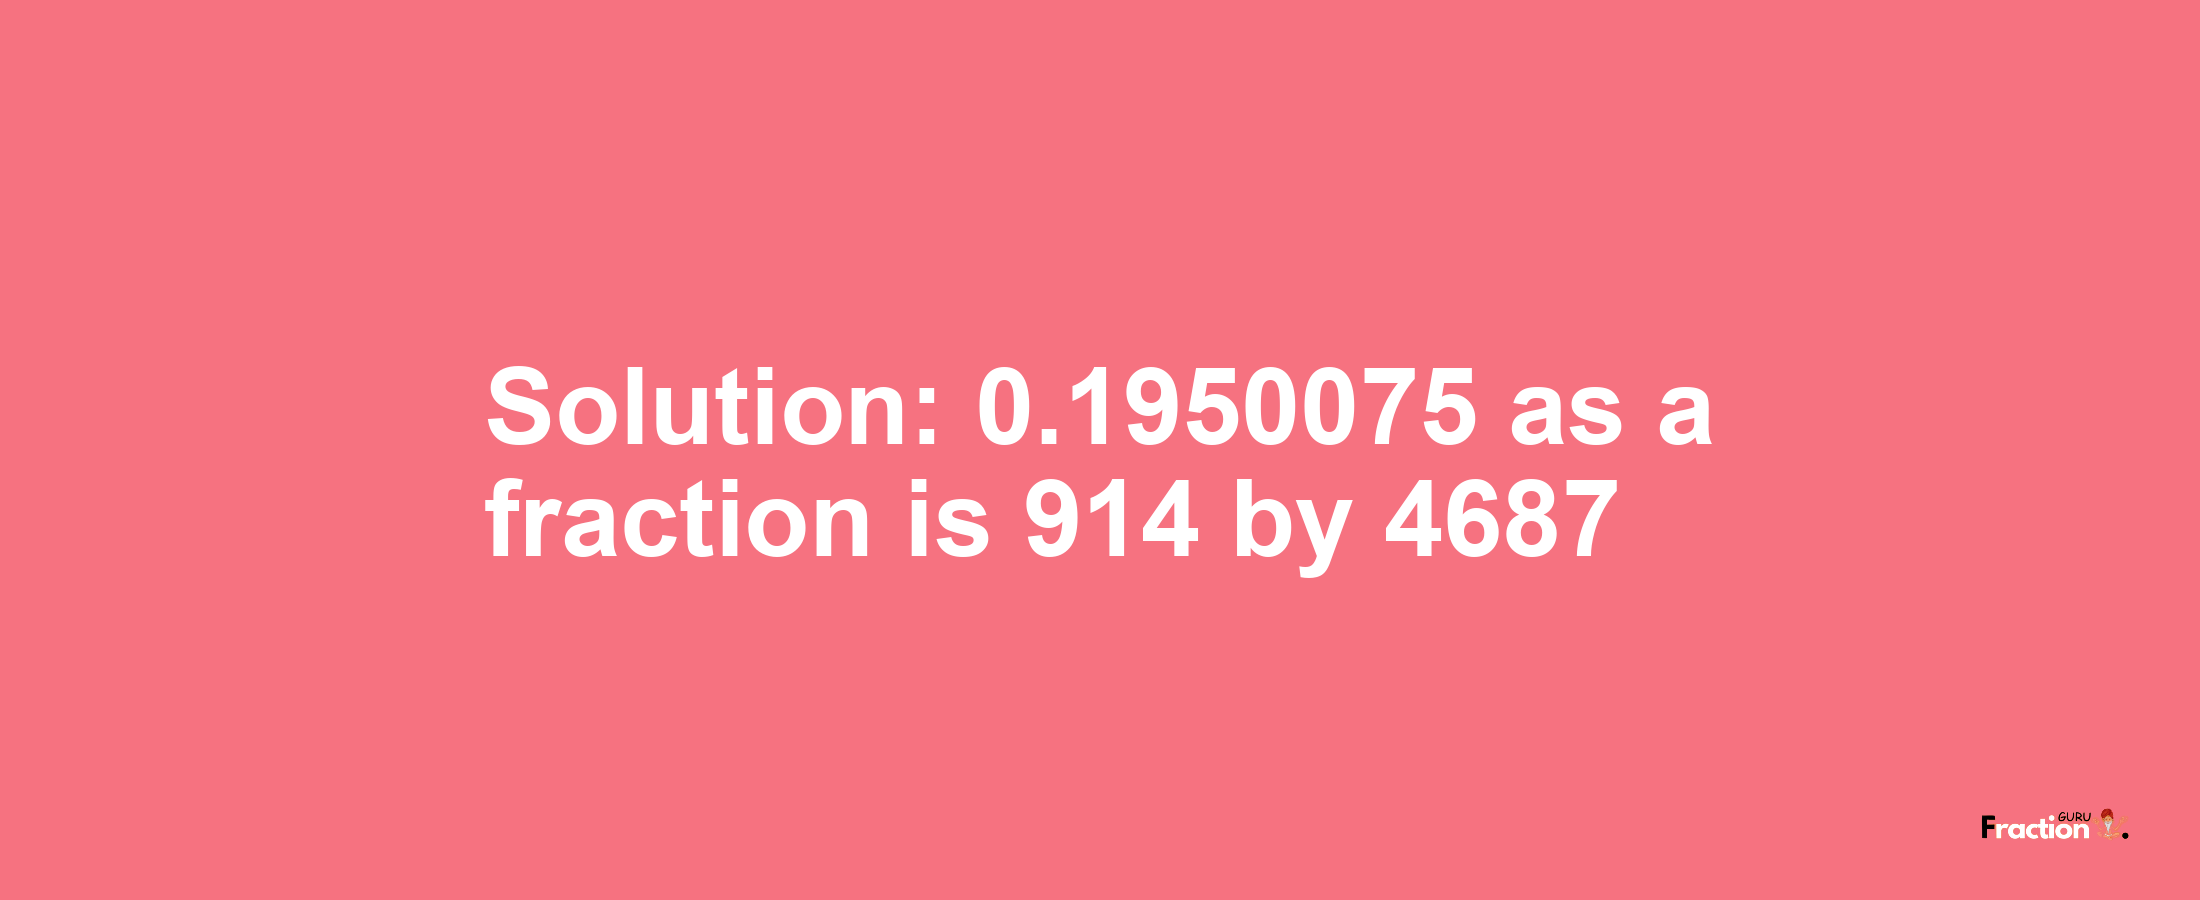 Solution:0.1950075 as a fraction is 914/4687